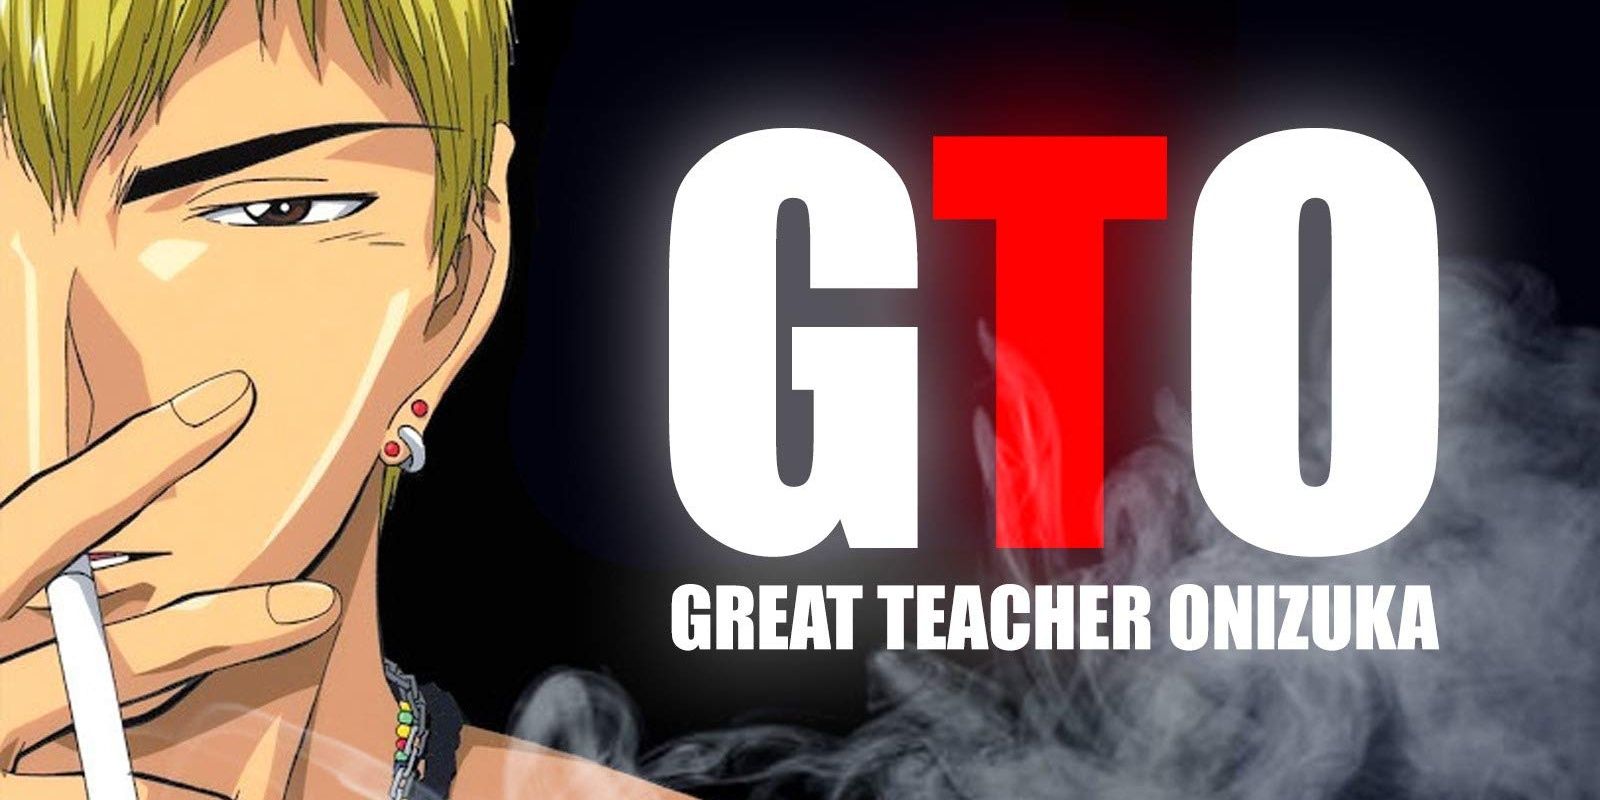 Official image for the Great Teacher Onizuka anime, available on RetroCrush